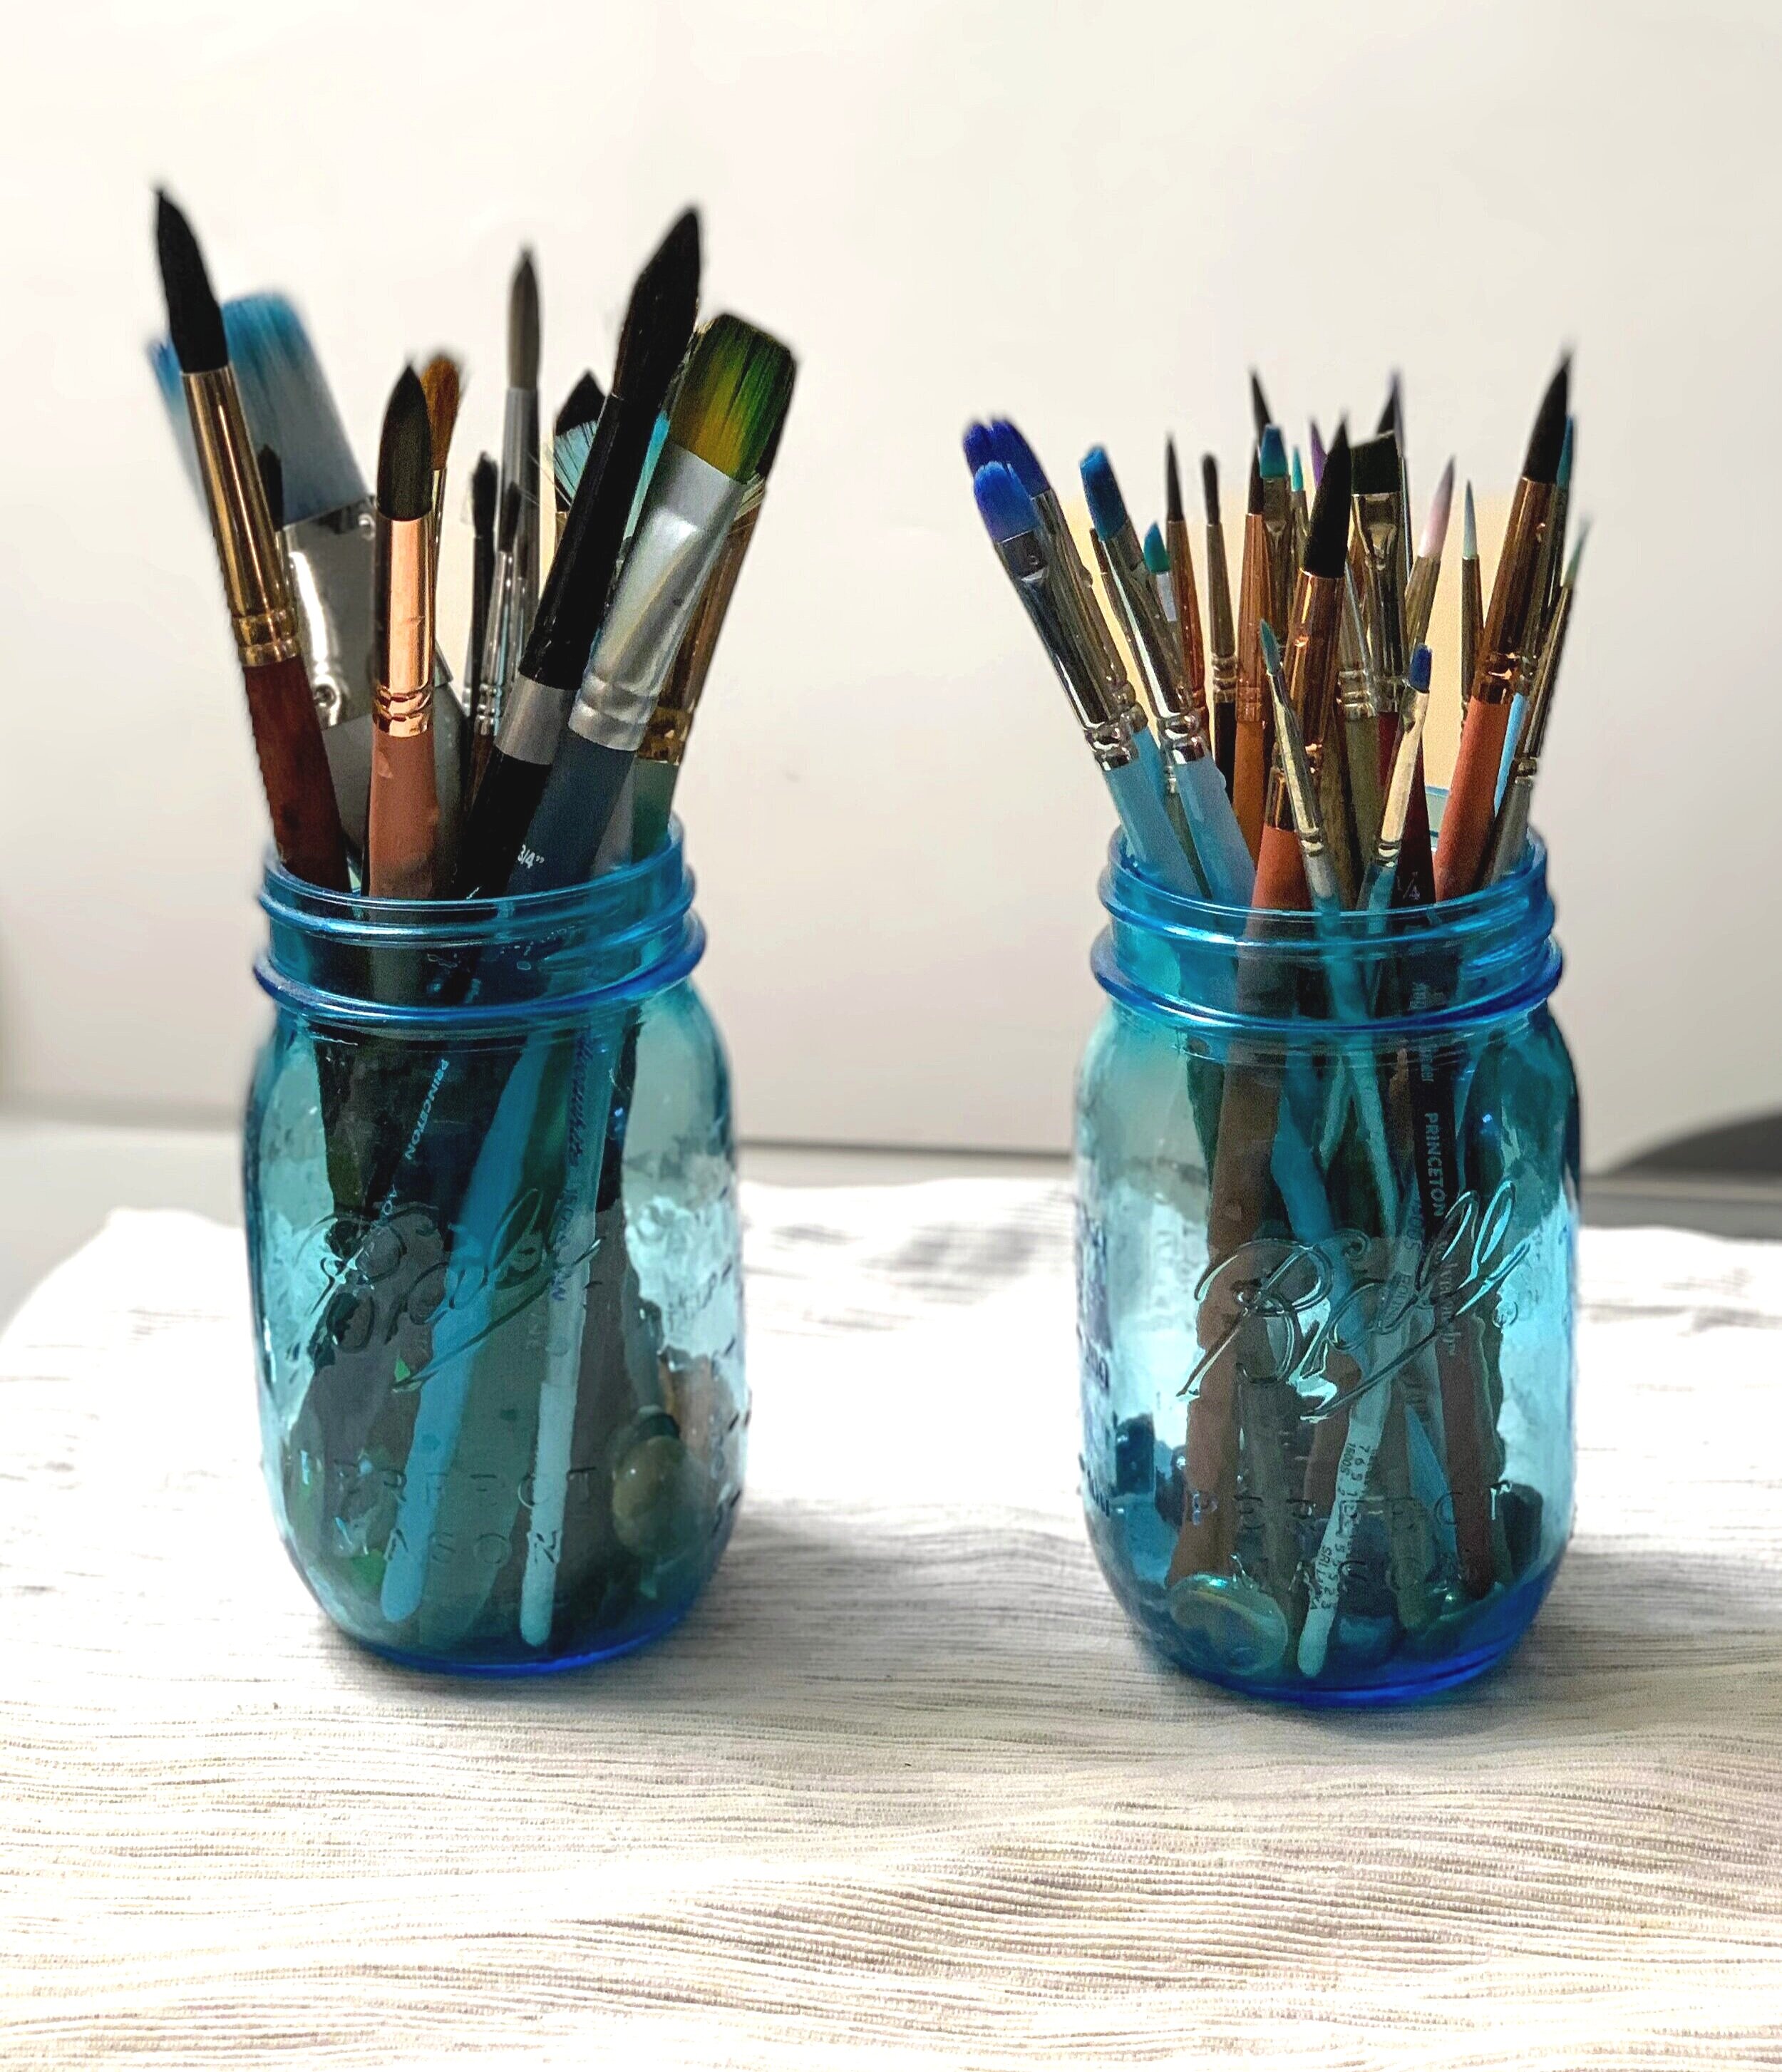 19,307 Paint Brushes Jar Images, Stock Photos, 3D objects